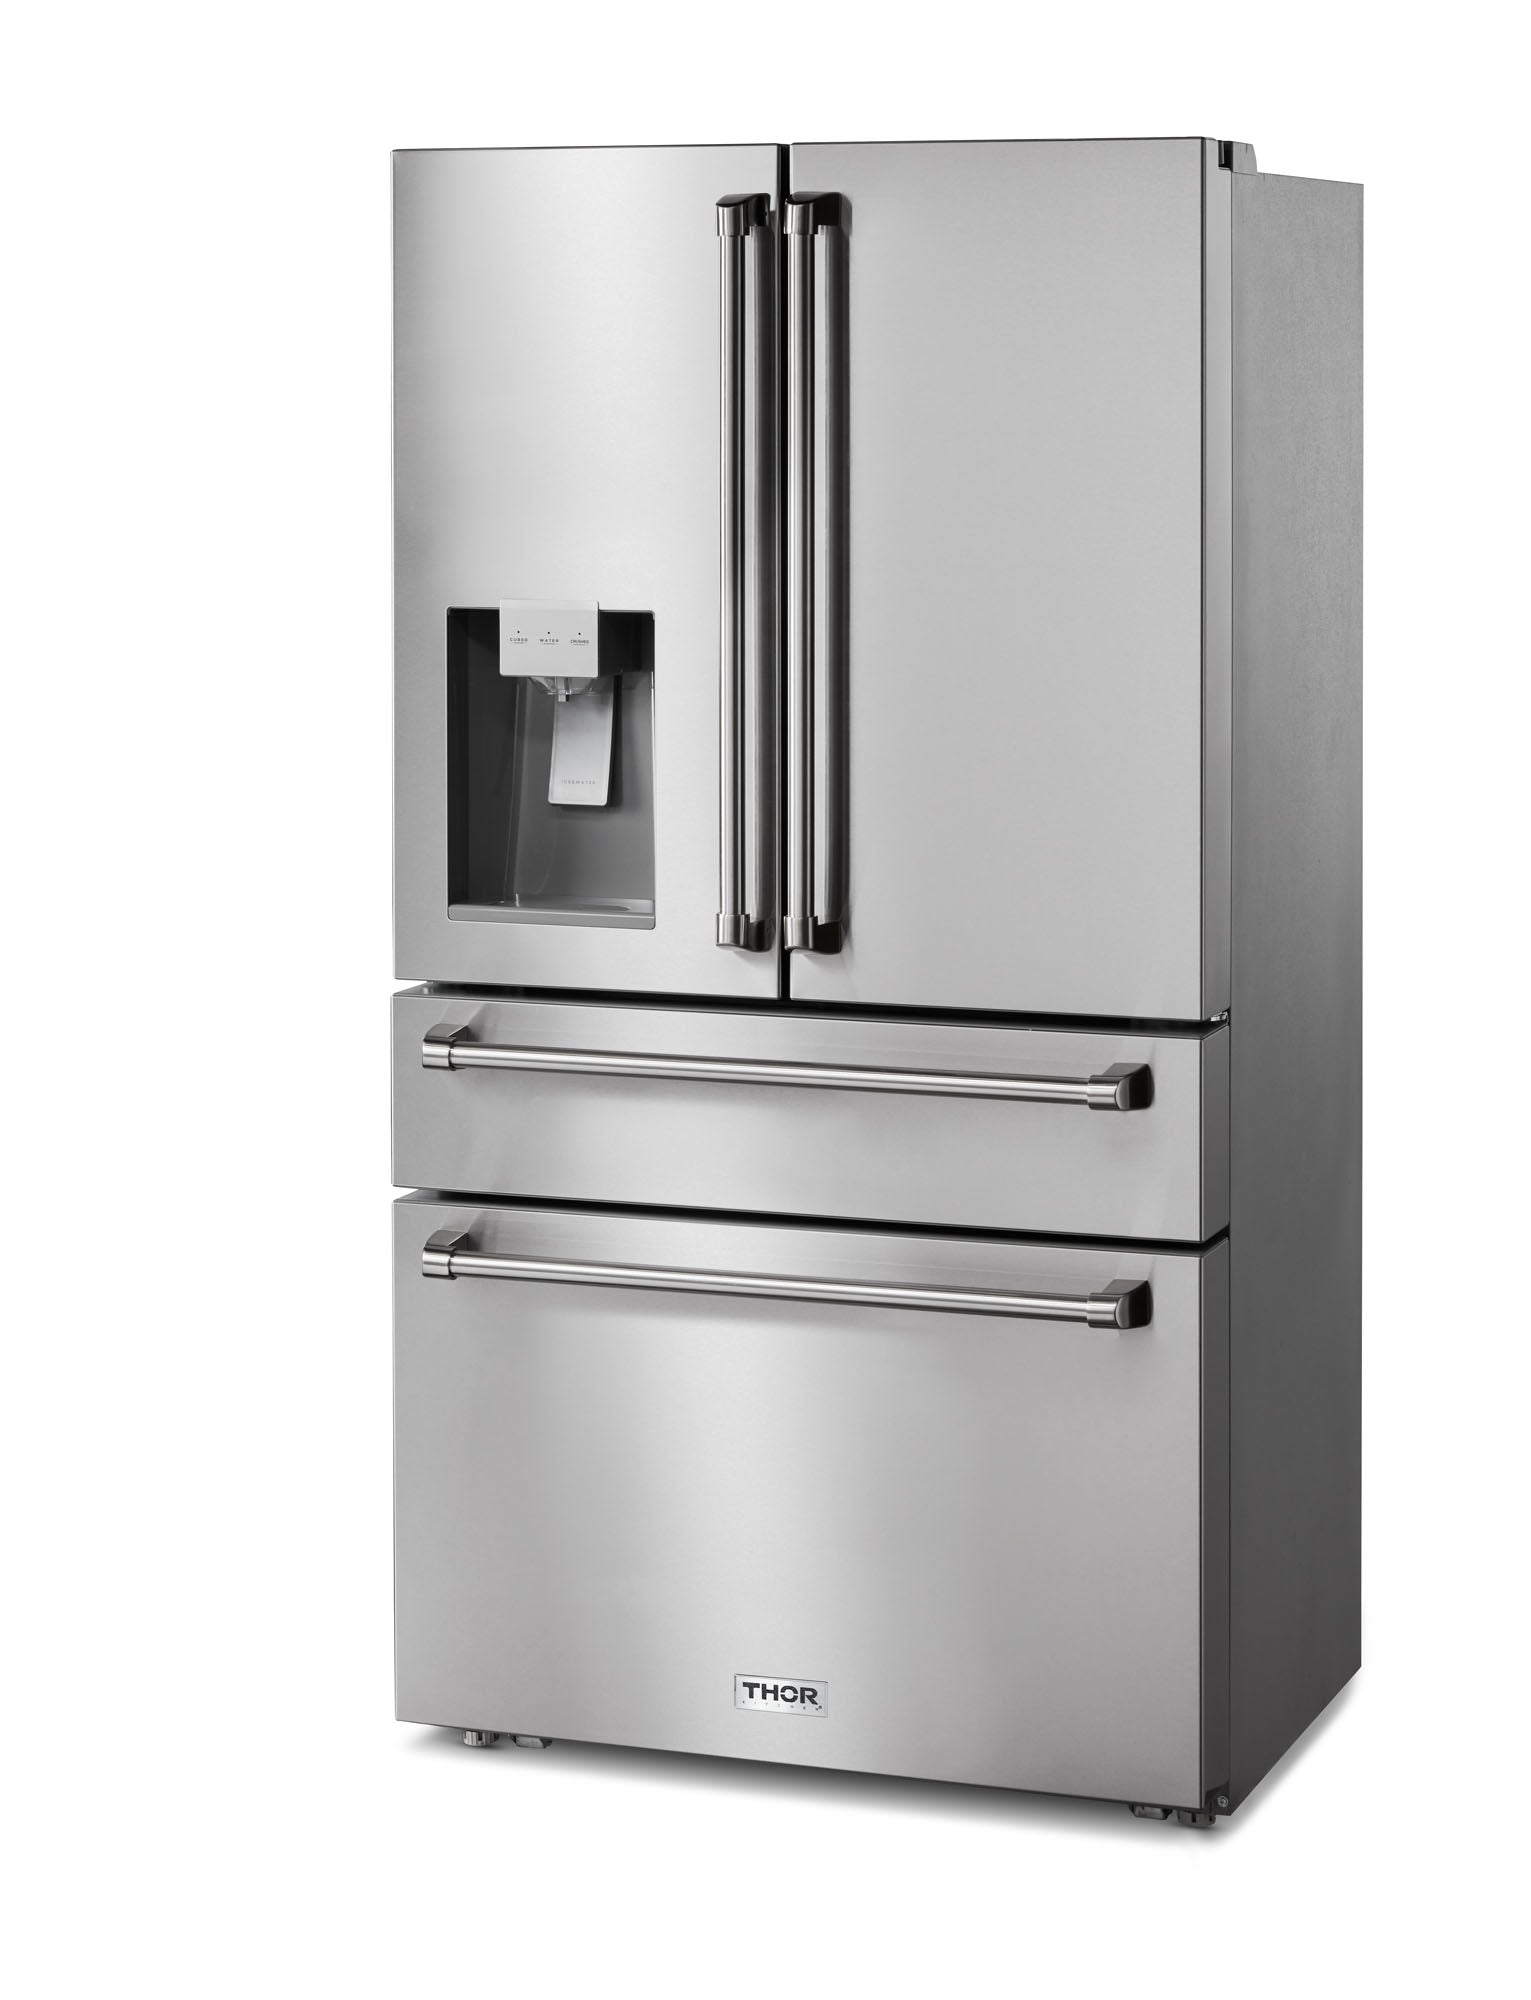 Thor Kitchen 36 Inch Professional French Door Refrigerator with Ice and Water Dispenser- Model TRF3601FD (Renewed)